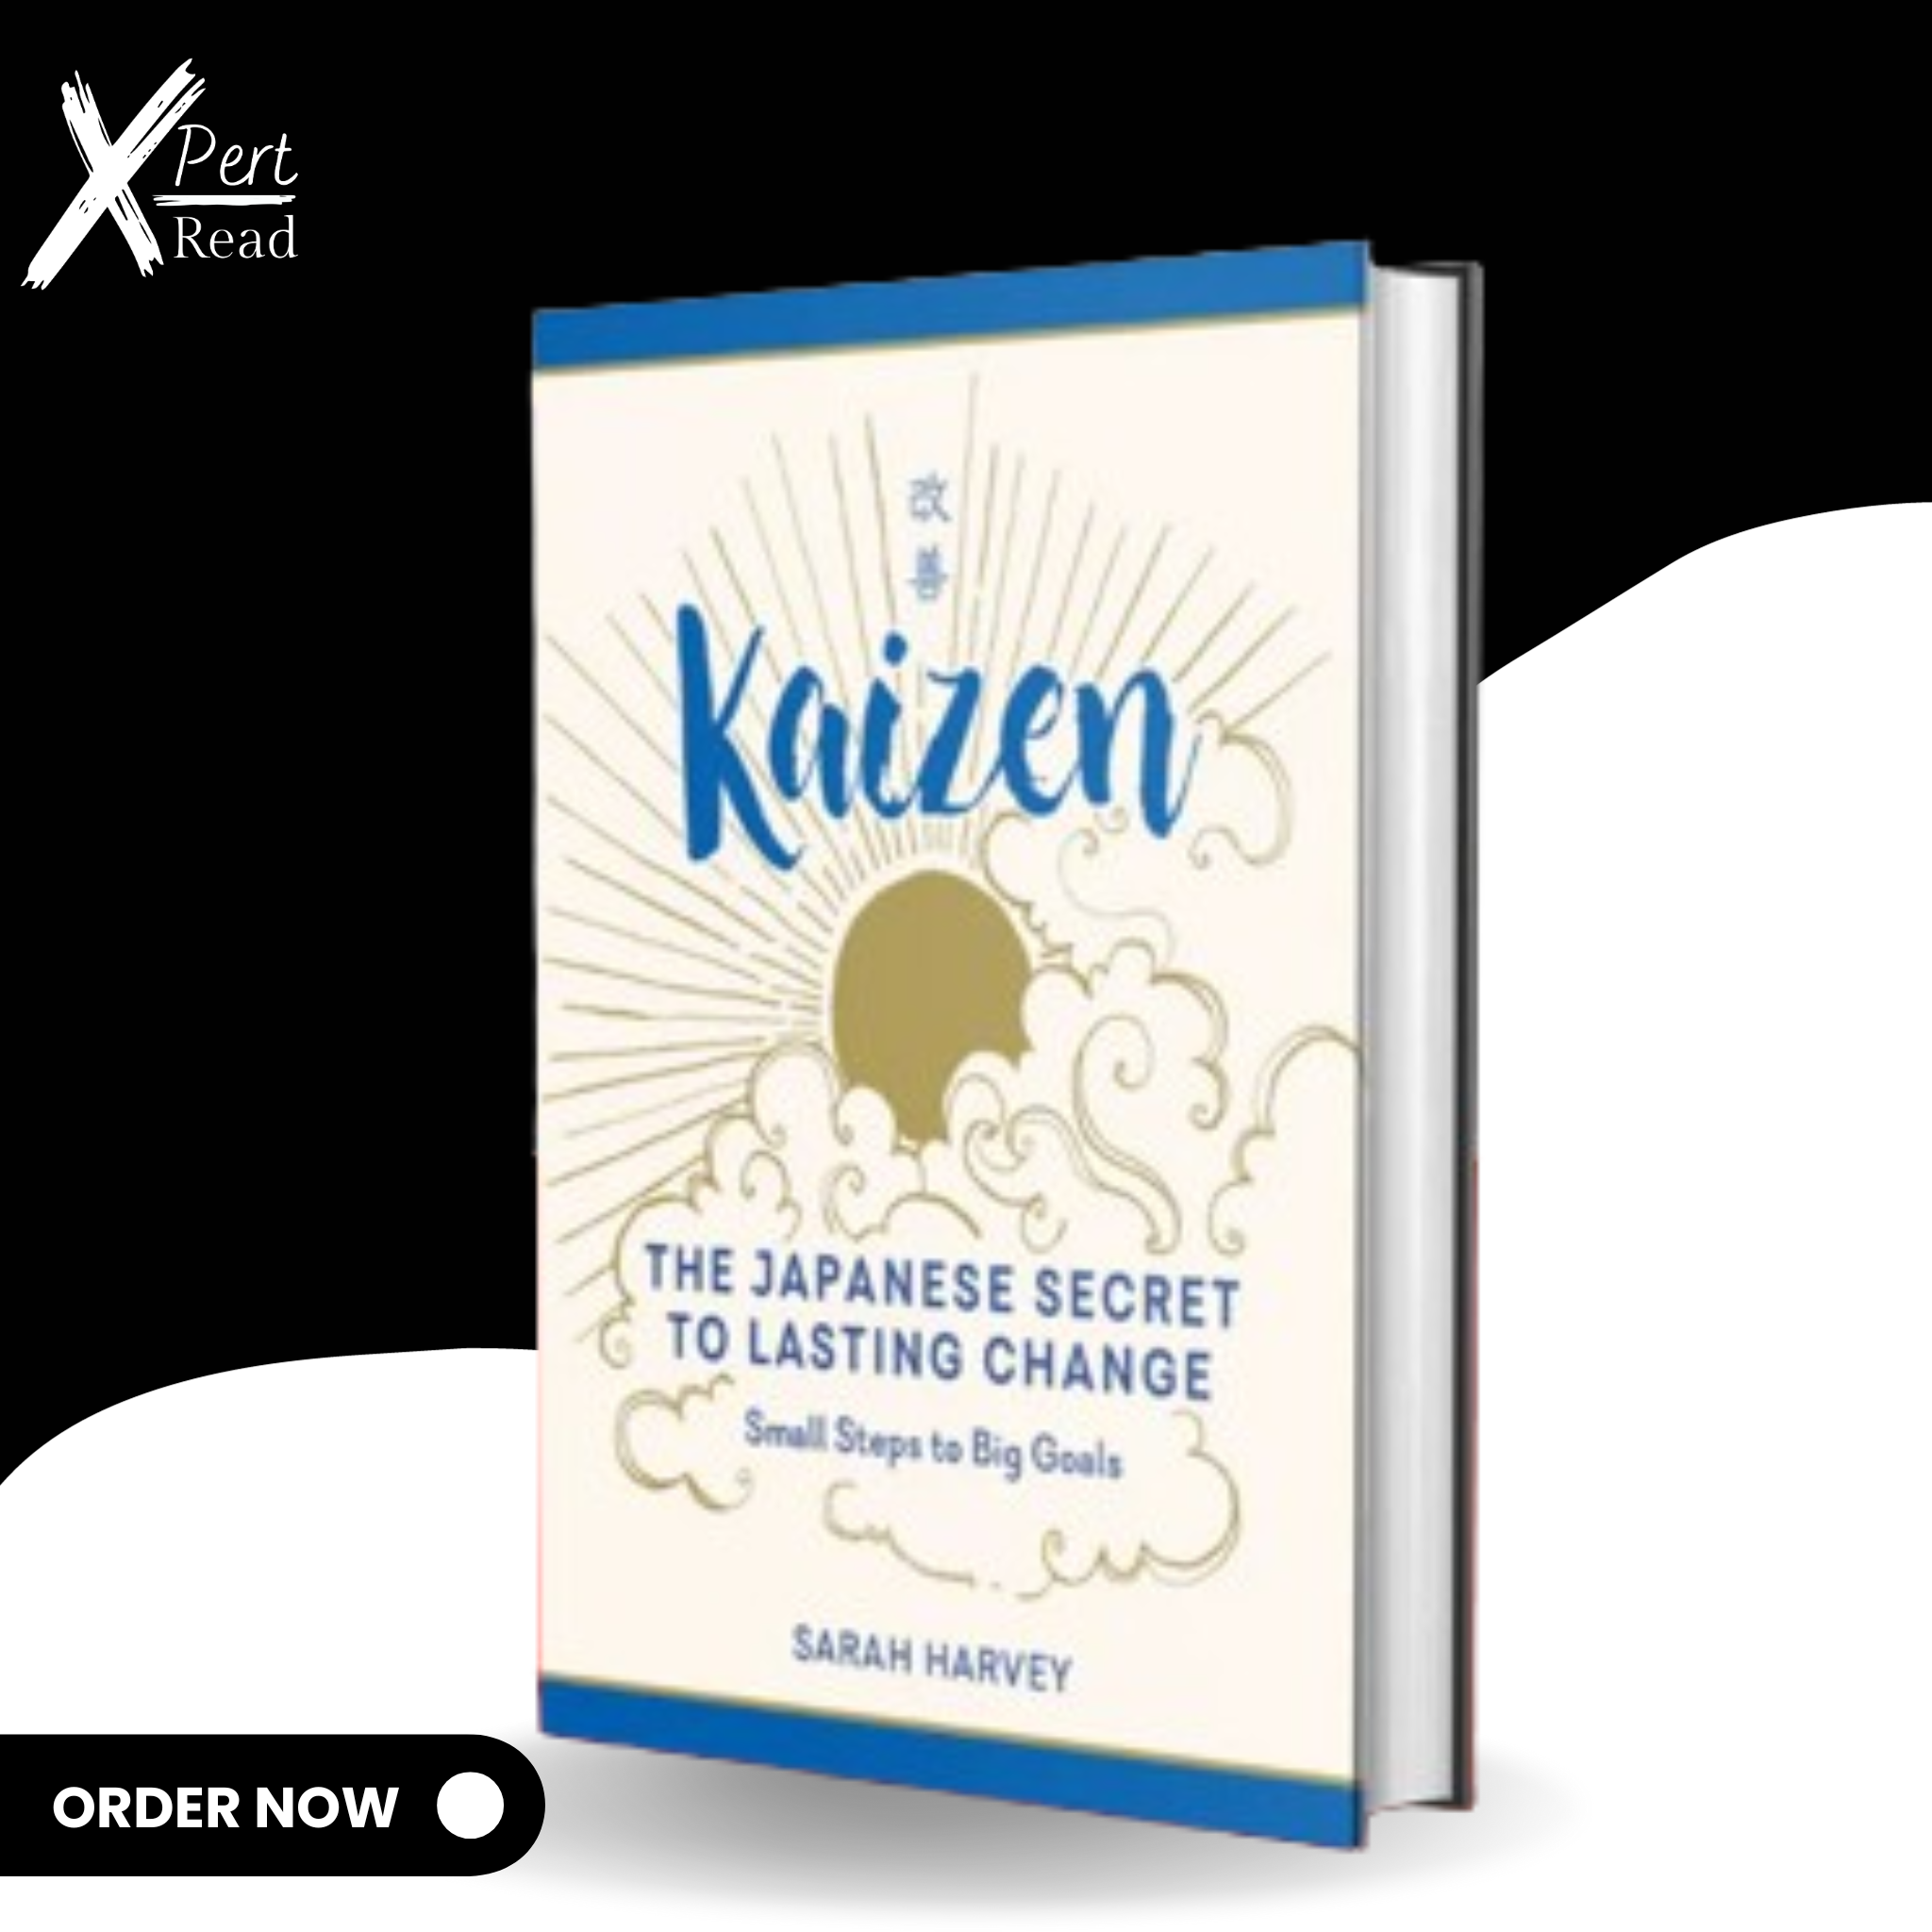 Kaizen: The Japanese Secret To Lasting Change By Sarah Harvey (Hardcover) (Limited Edition)